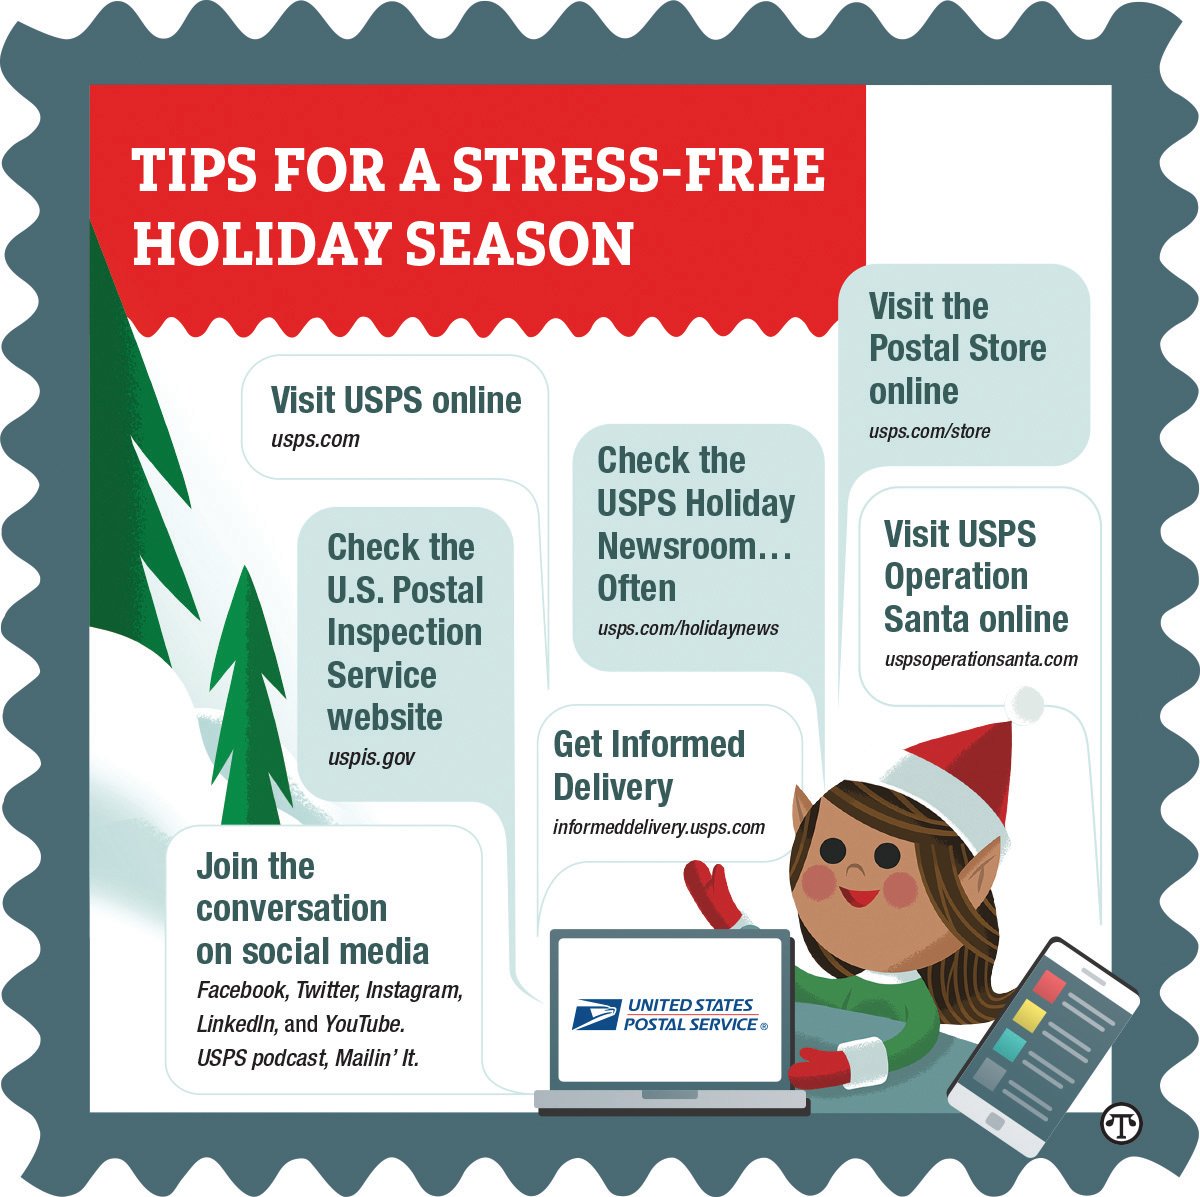 Following a few simple steps can make it easier for you to send out gifts this holiday season.